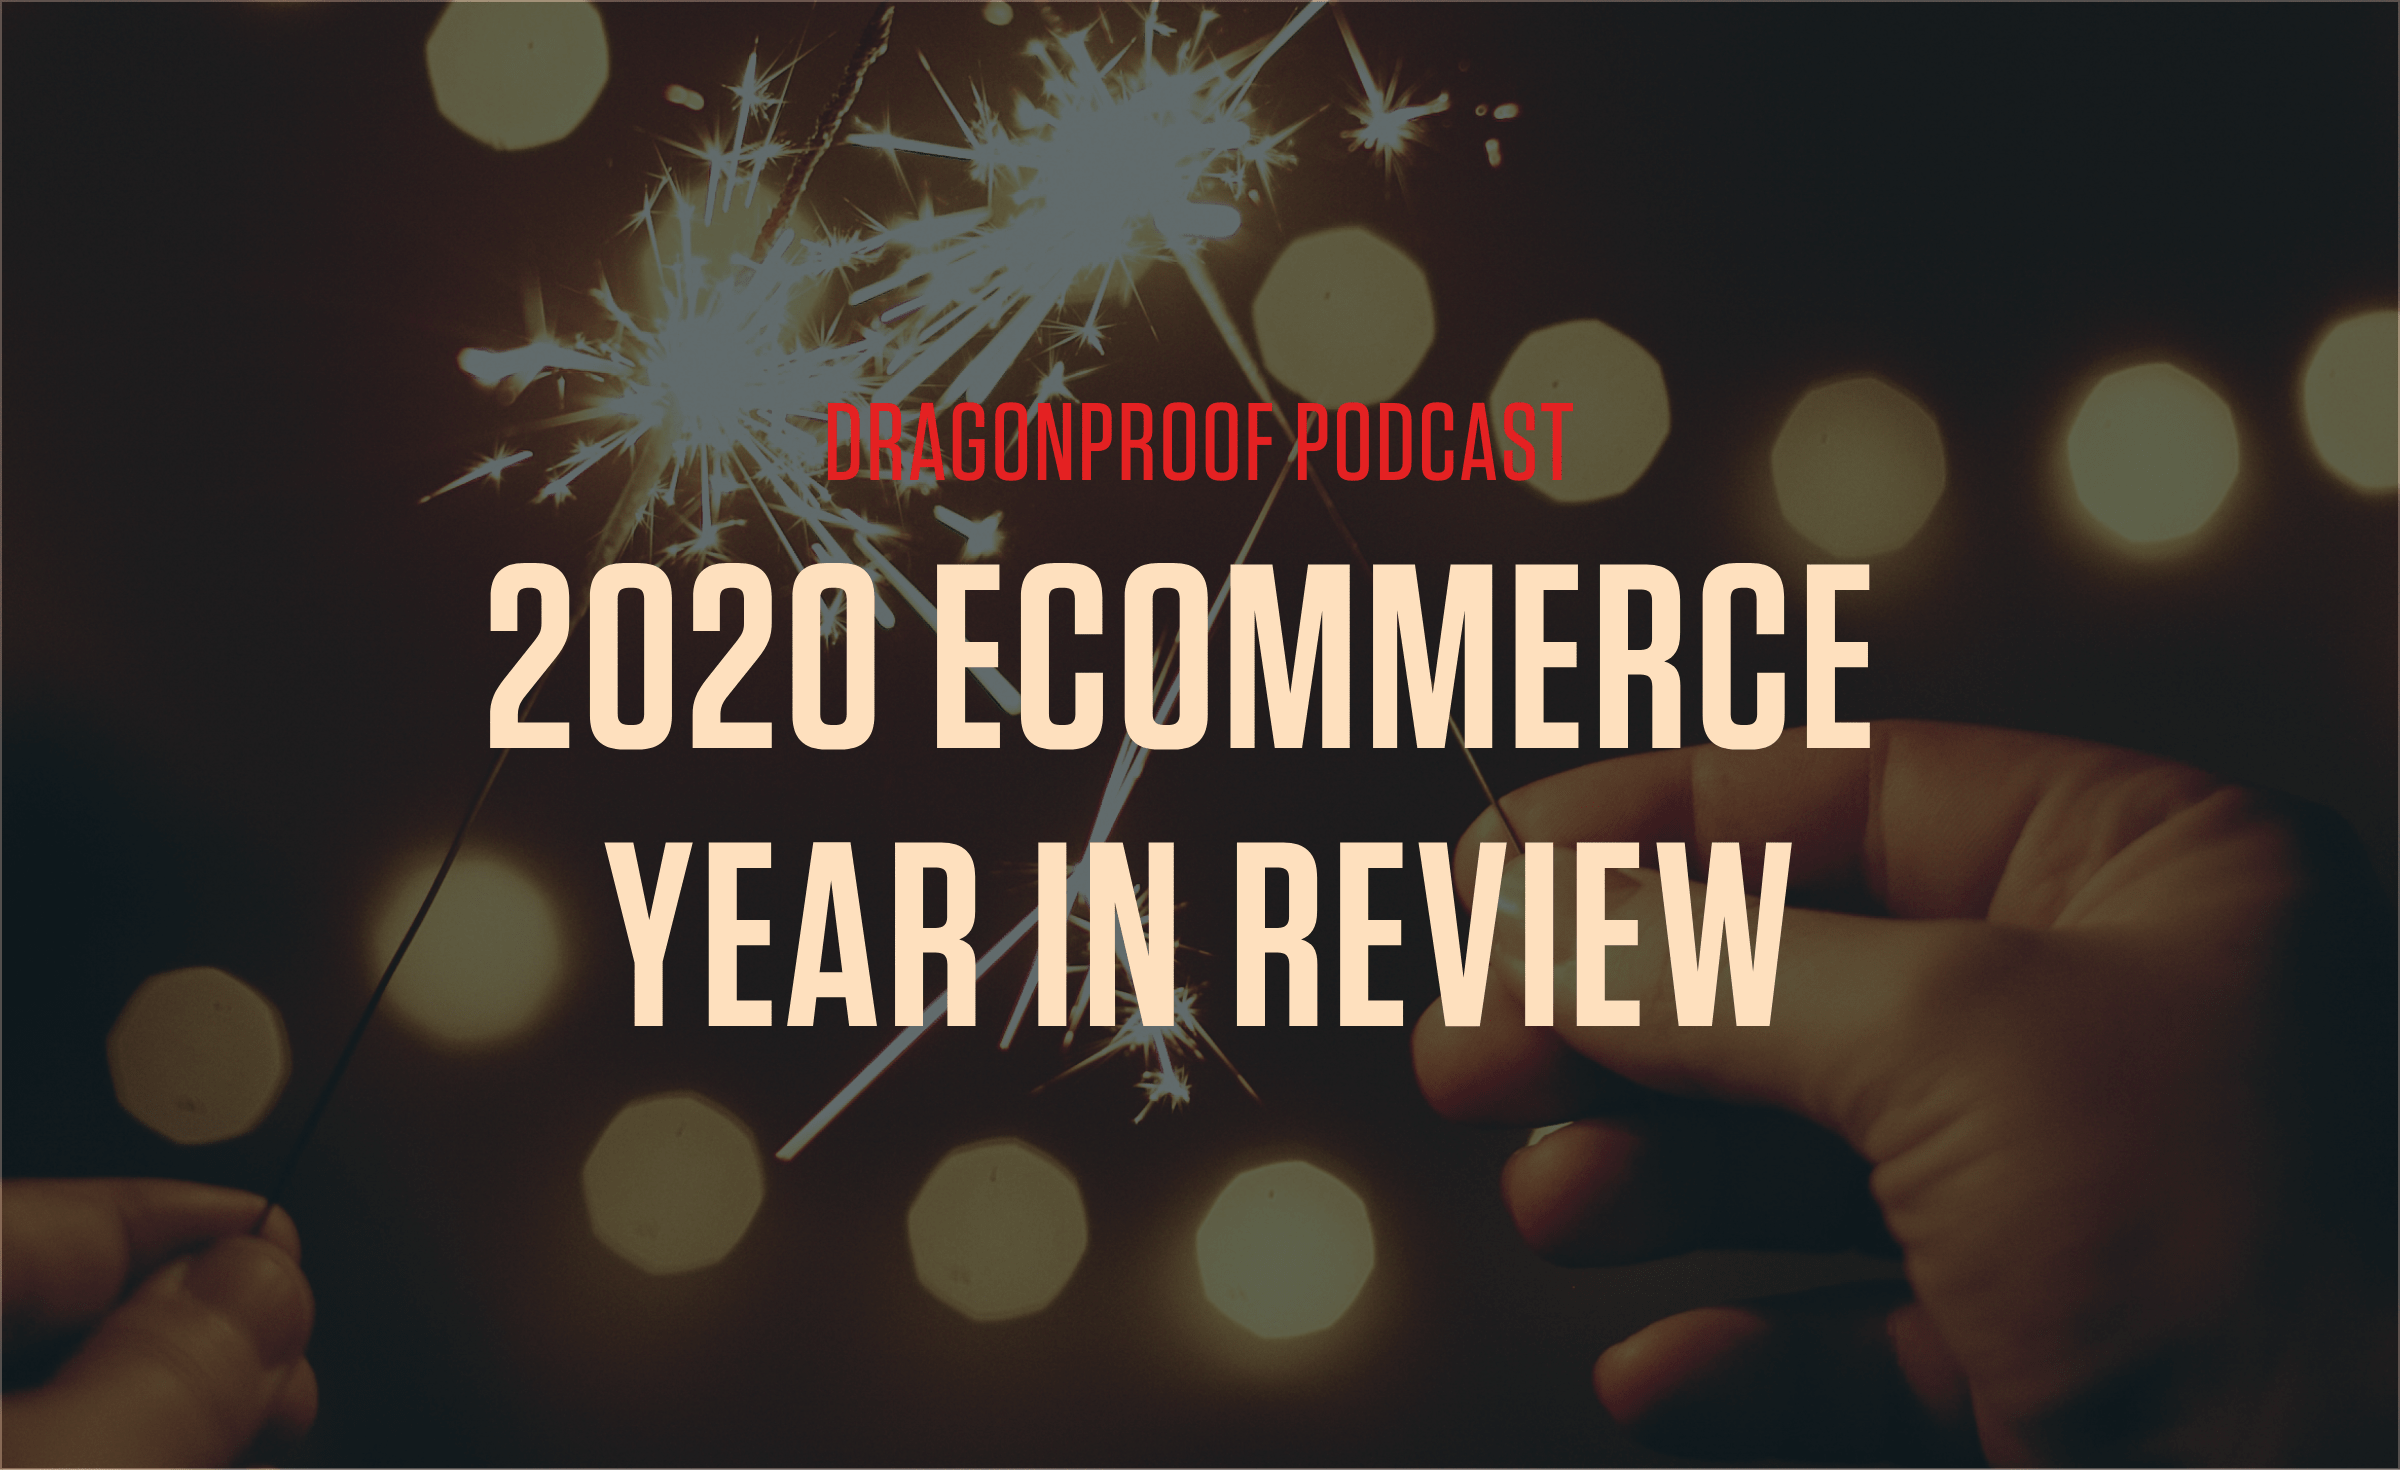 Dragonproof Podcast Title Card - 2020 Ecommerce Year in Review